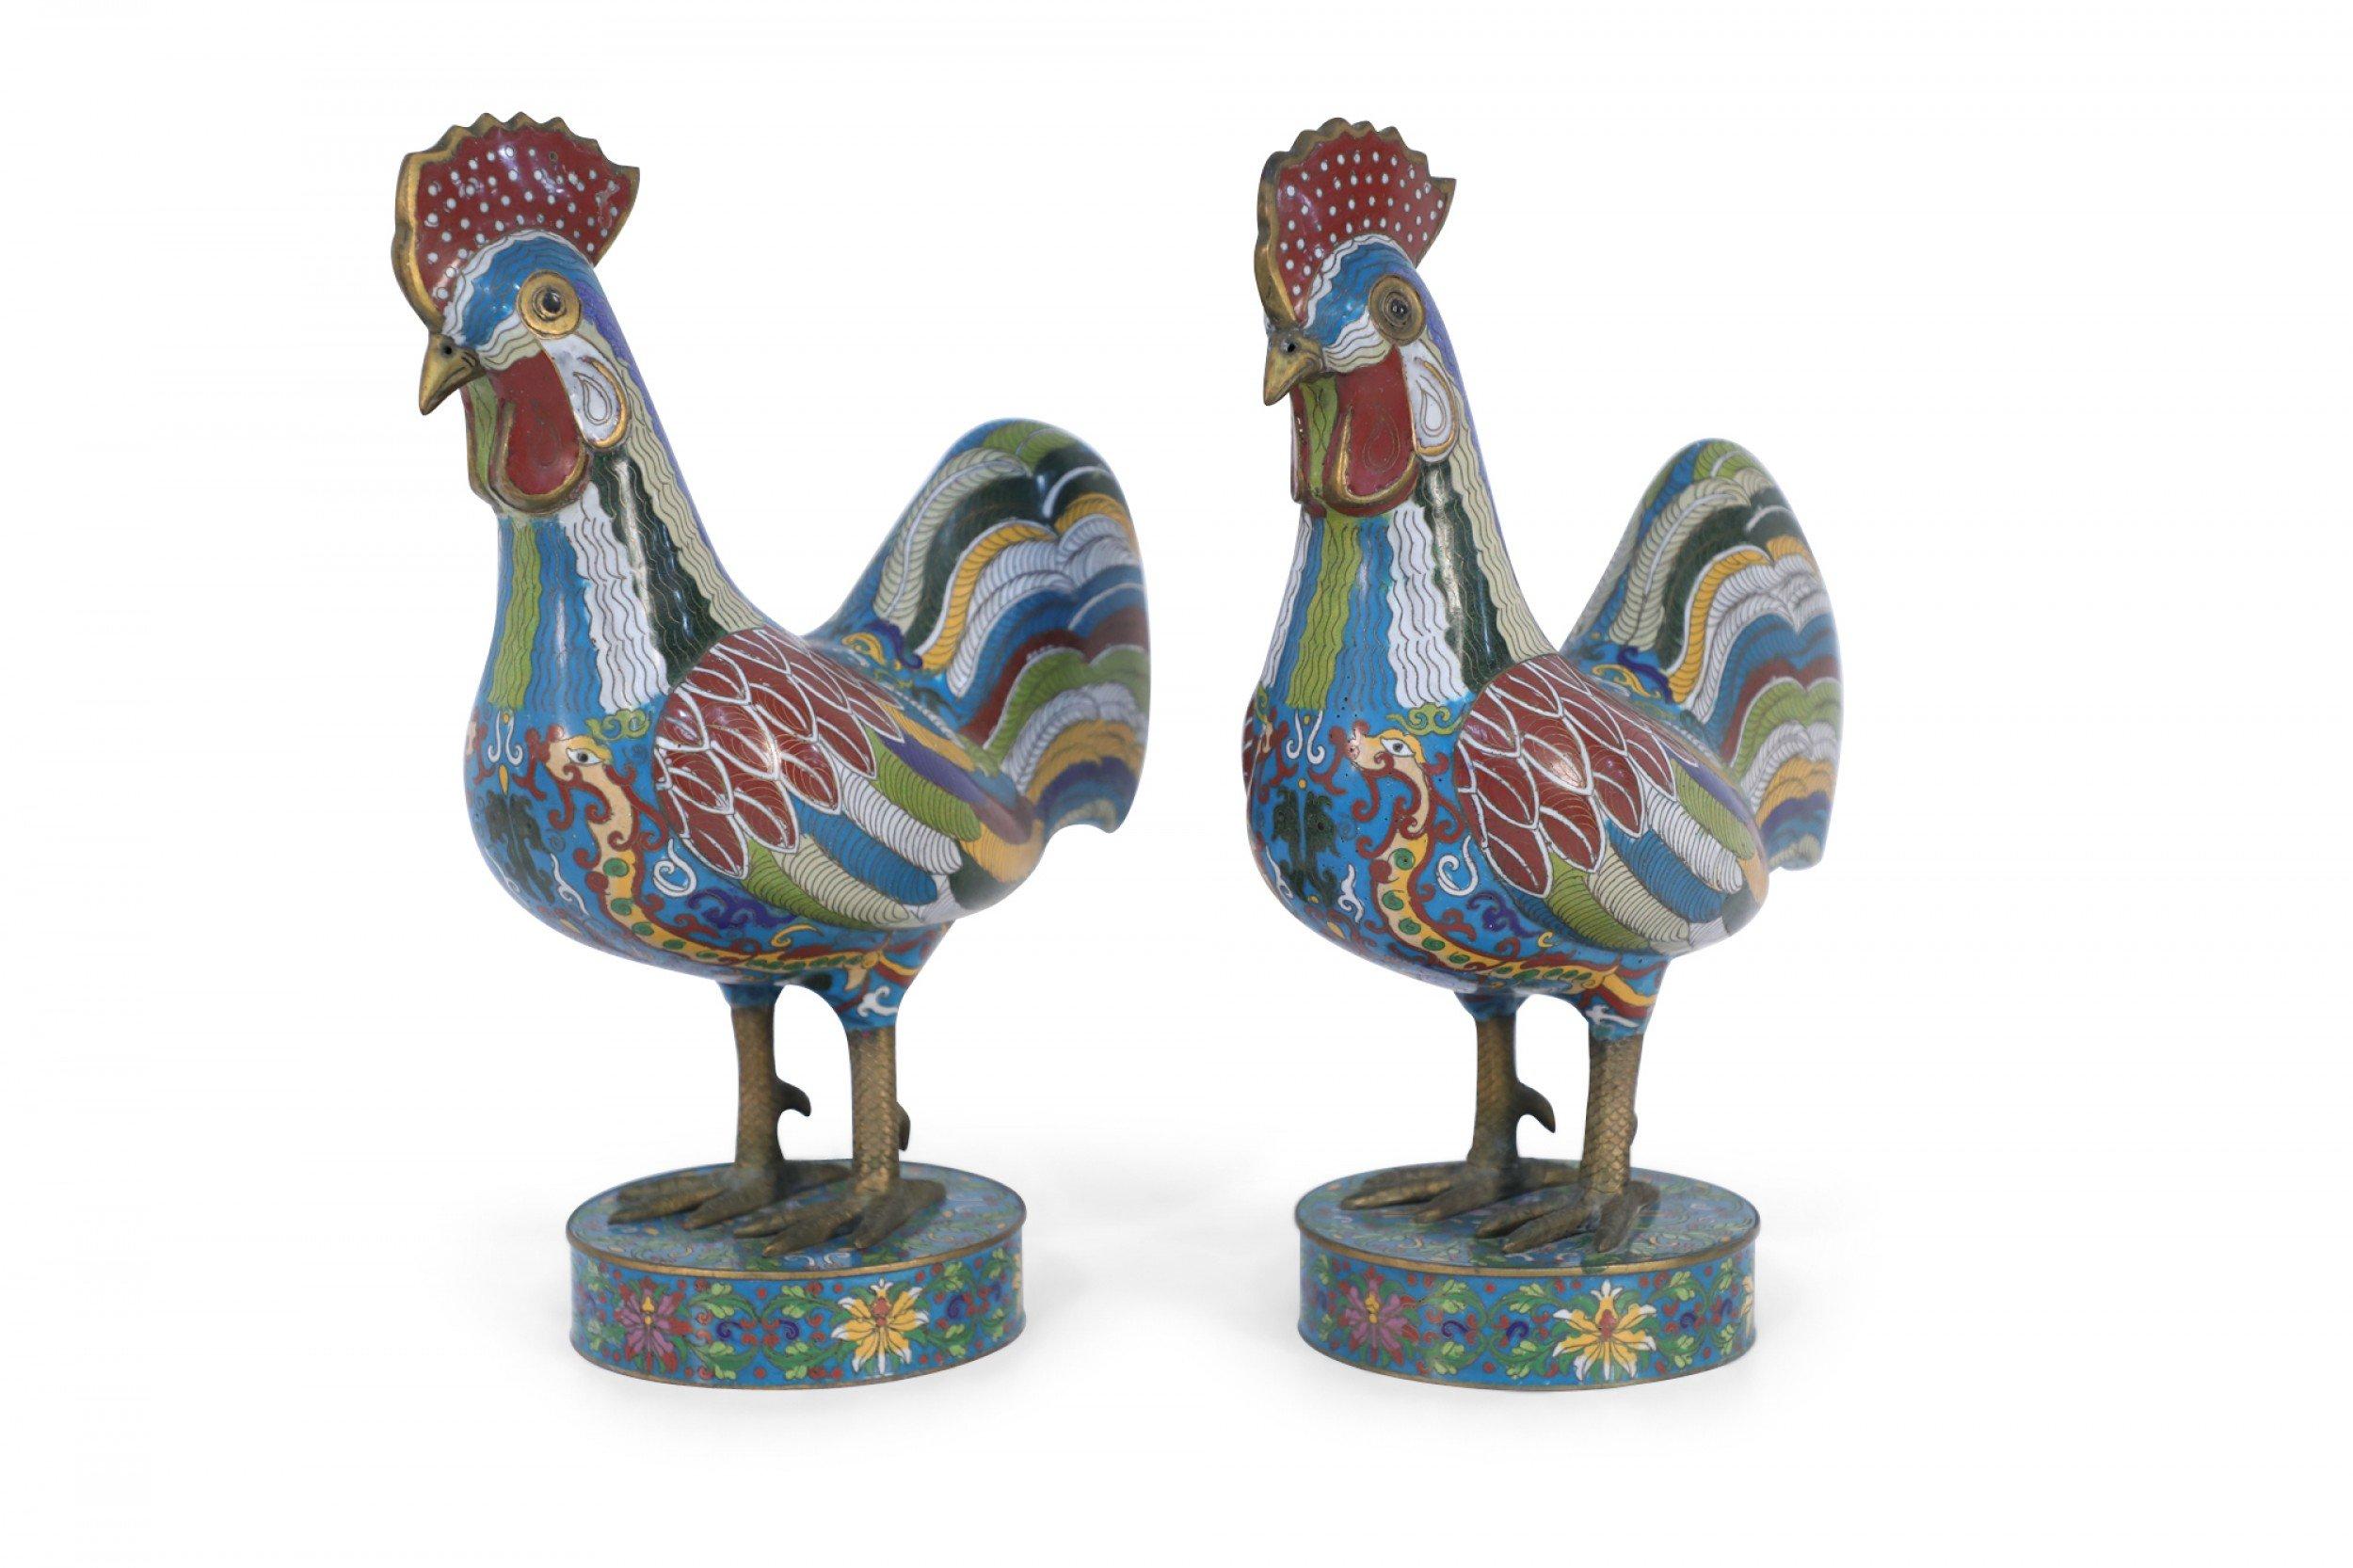 Pair of Antique Chinese Multi-Colored Cloisonne Rooster Sculptures For Sale 8